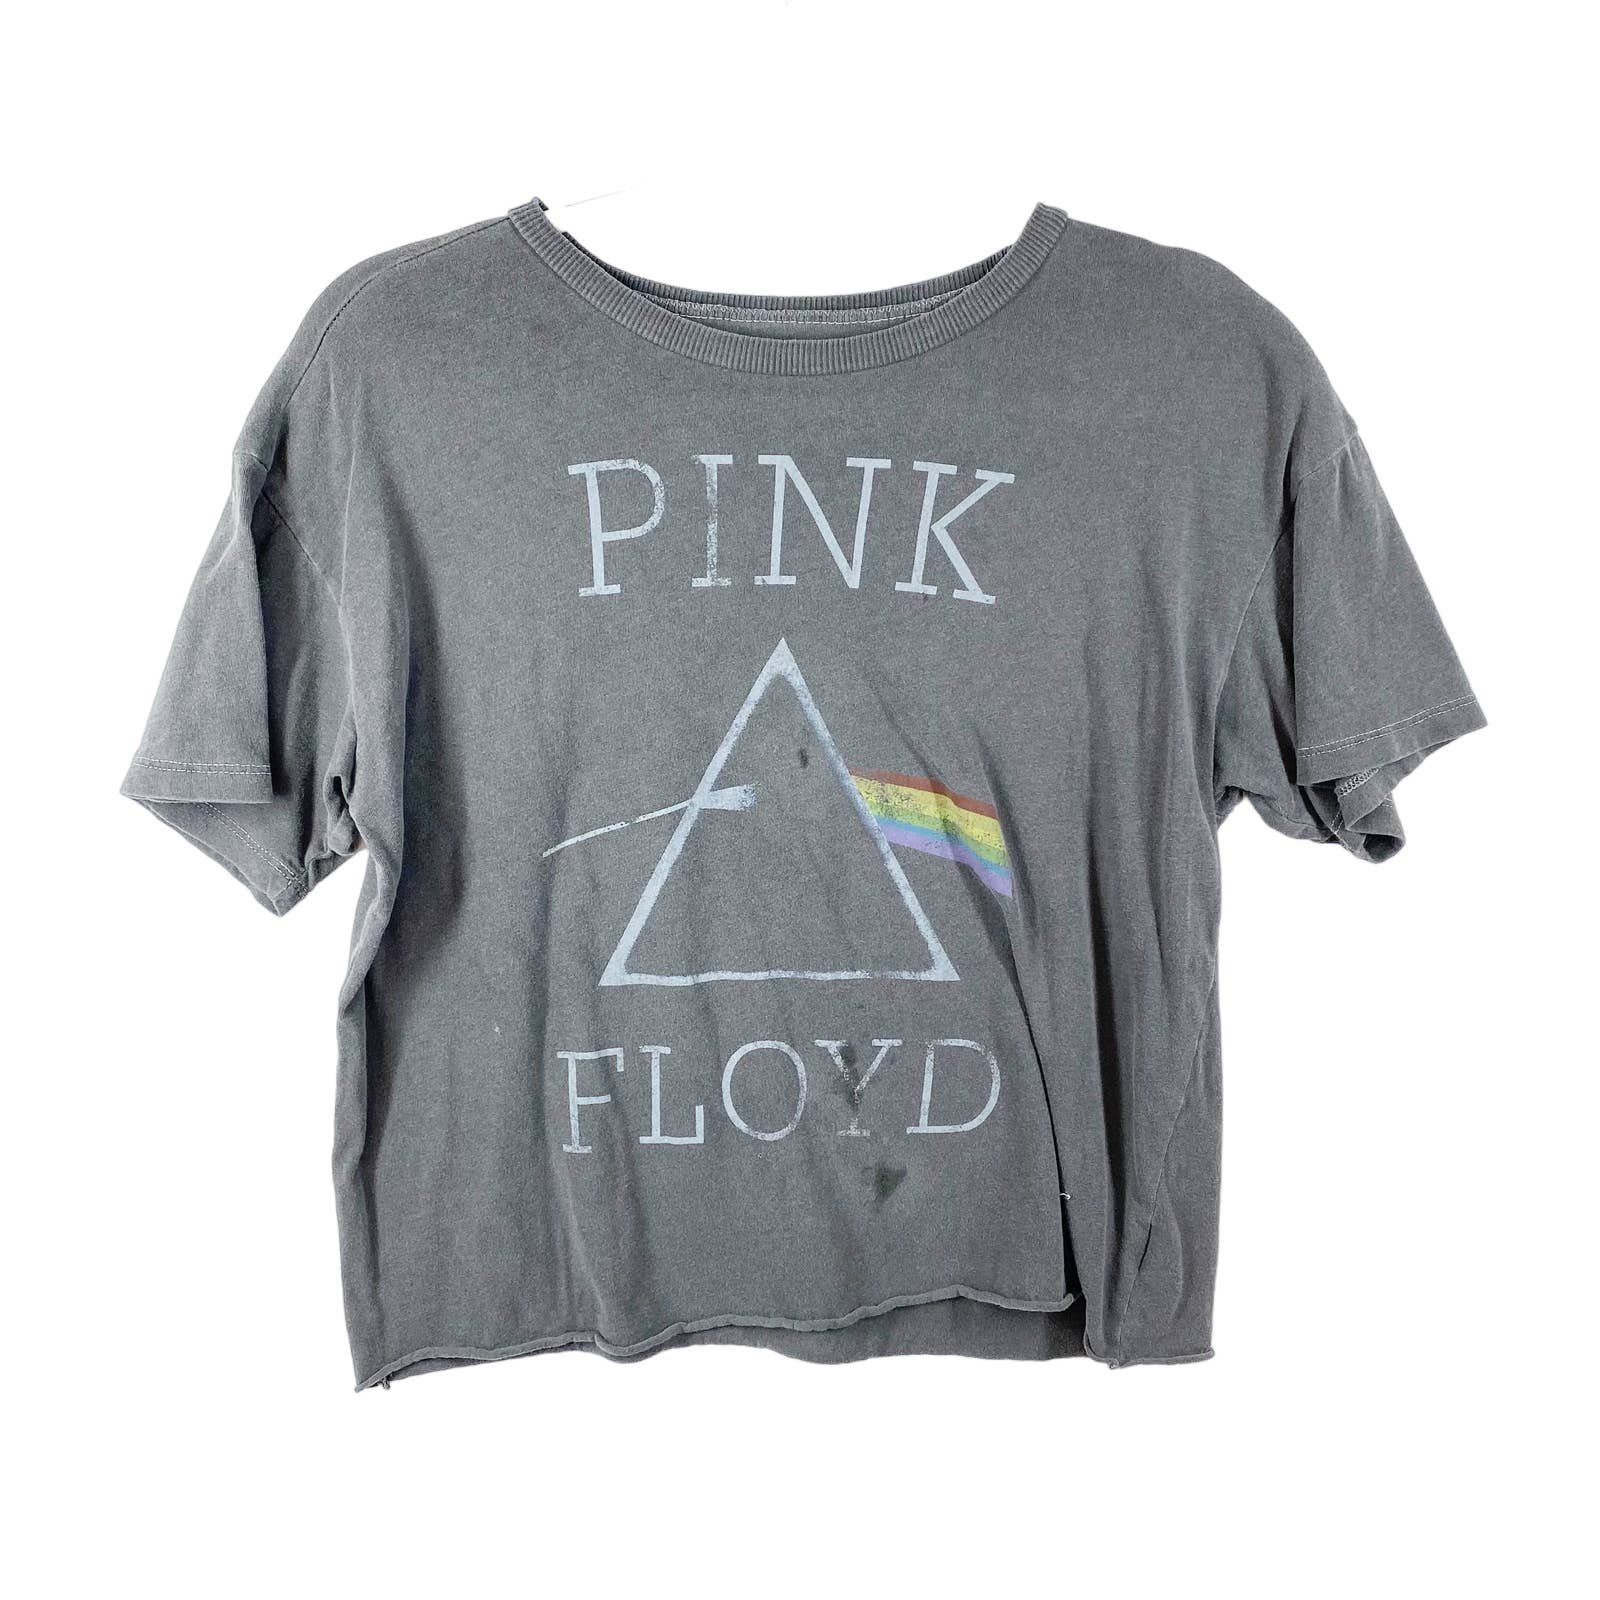 Simple Pink Floyd Cropped T-Shirt Gray Faded Graphic Womens Cotton Short Sleeve Small jdmtFJz9p Fashion